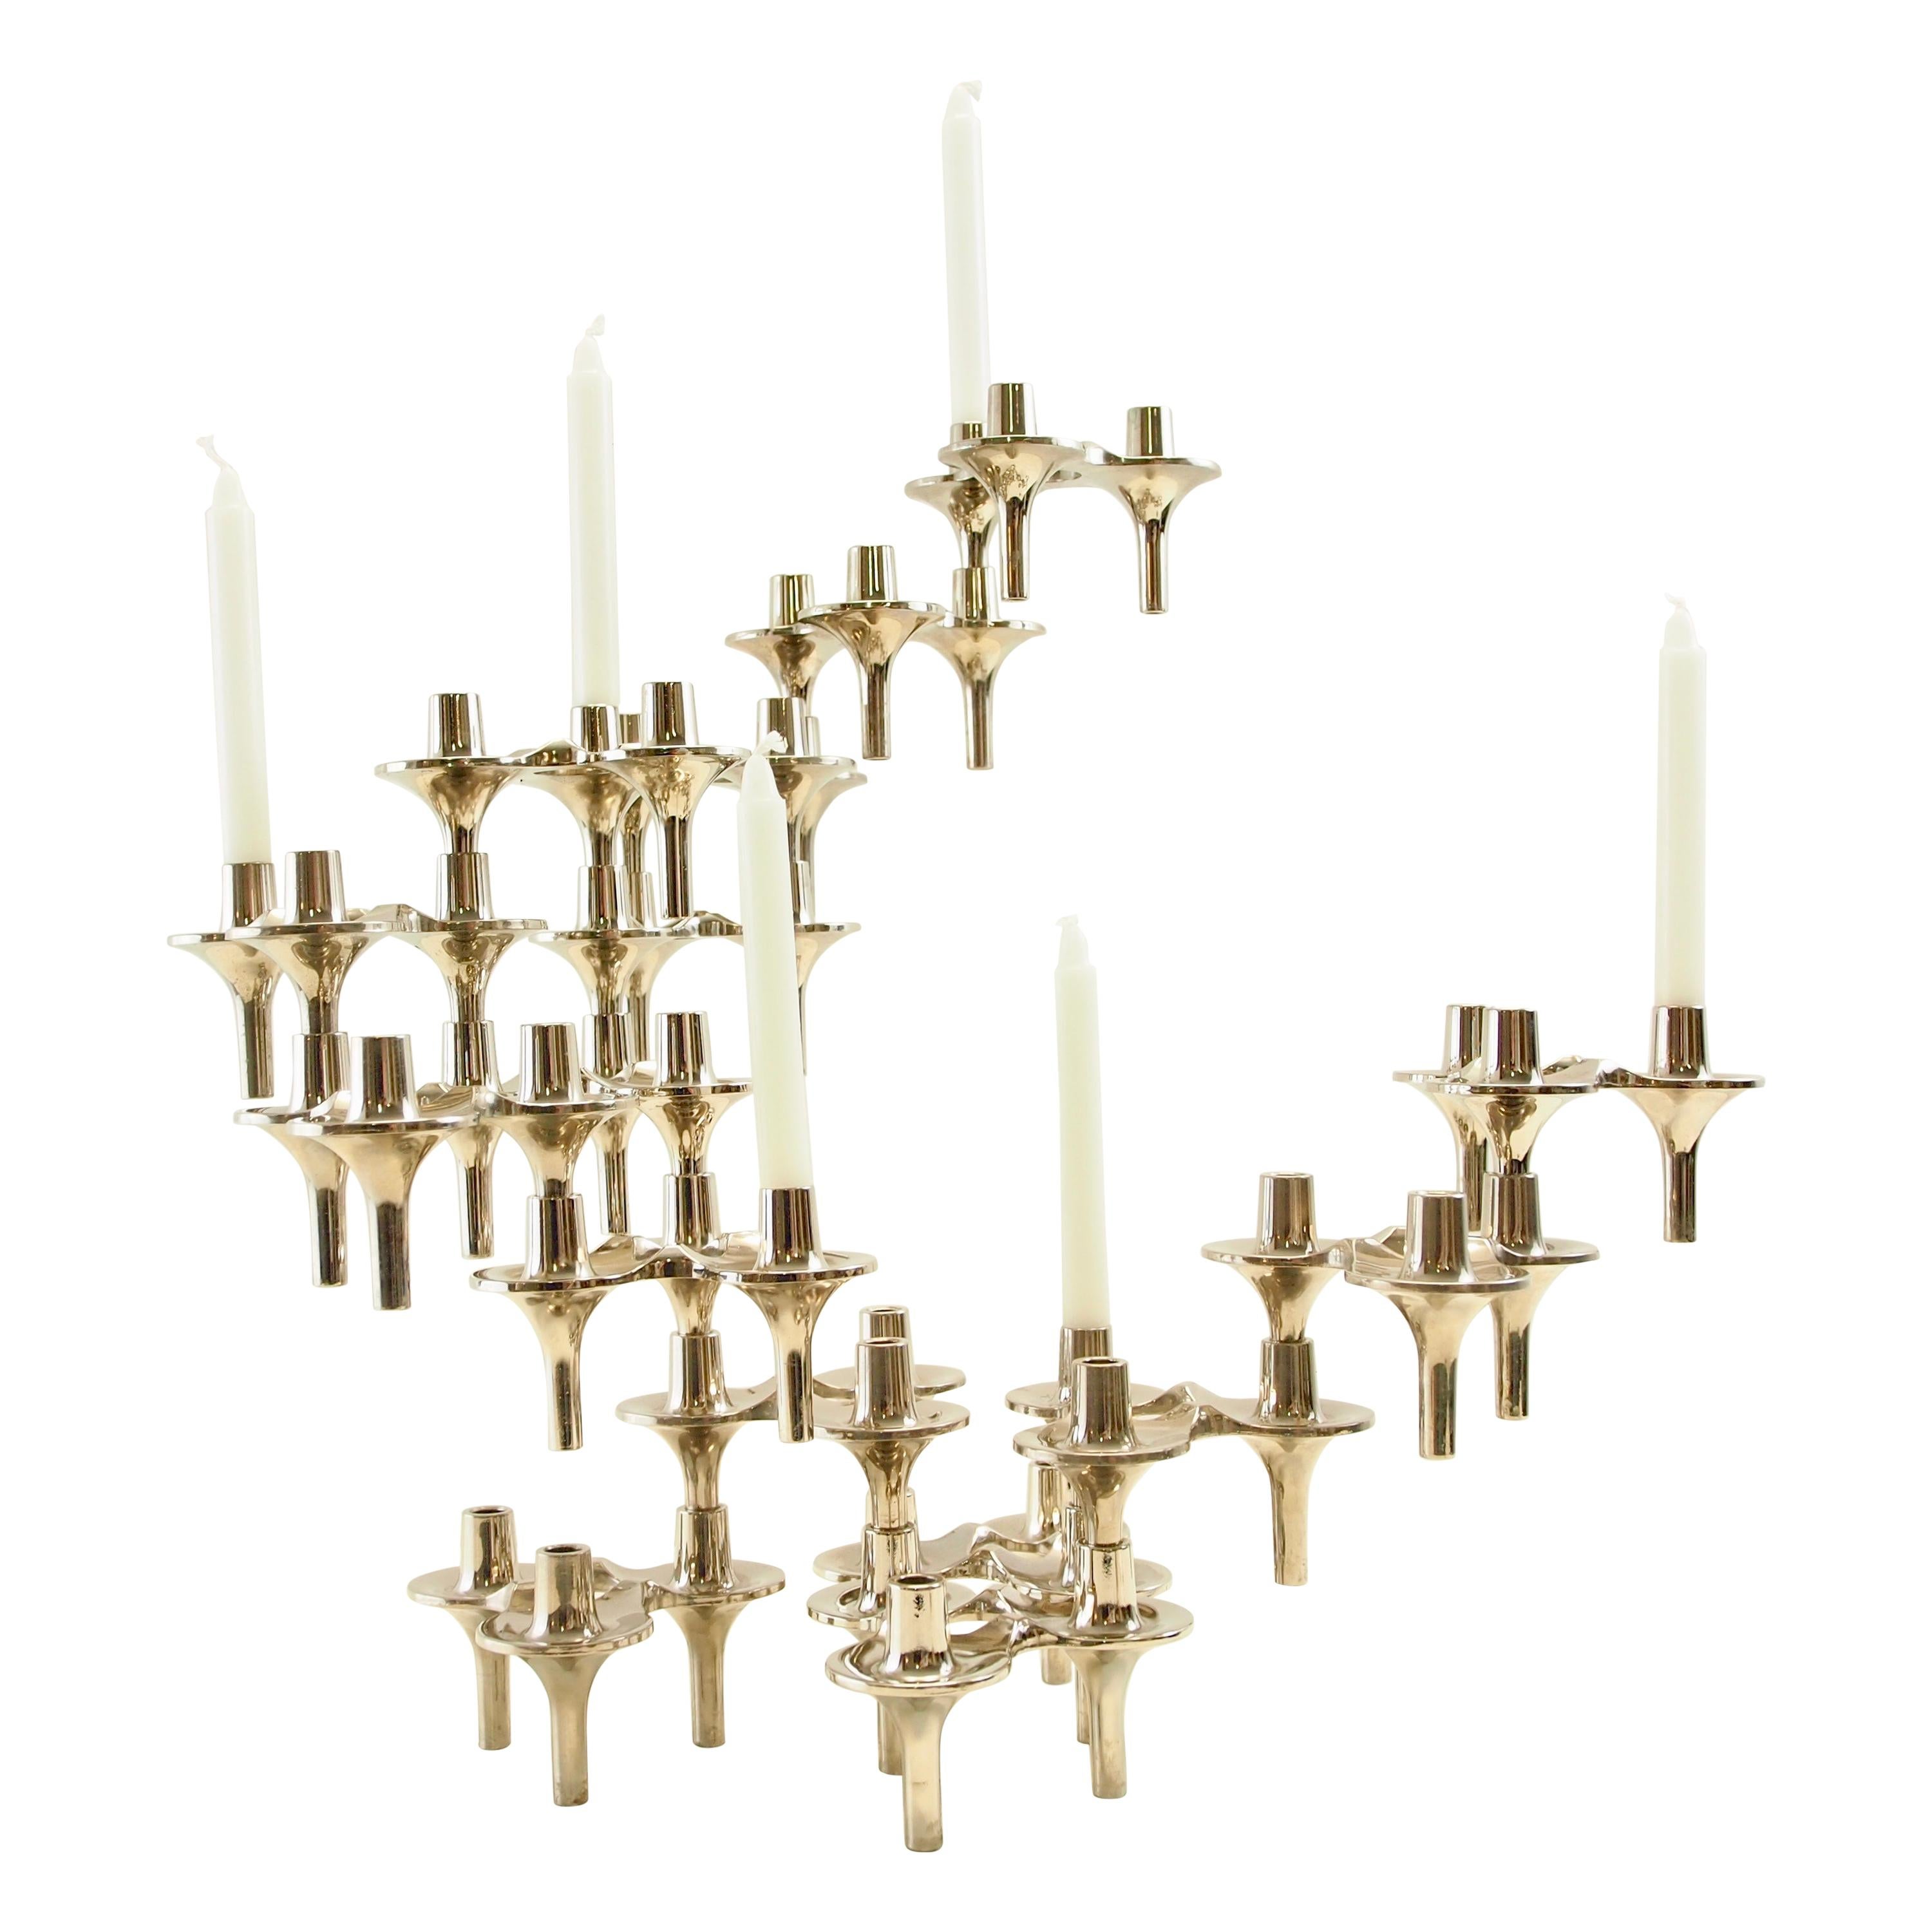 Set of 16 Midcentury Chrome "Orion" Candleholders by Nagel & Stoffi for BMF